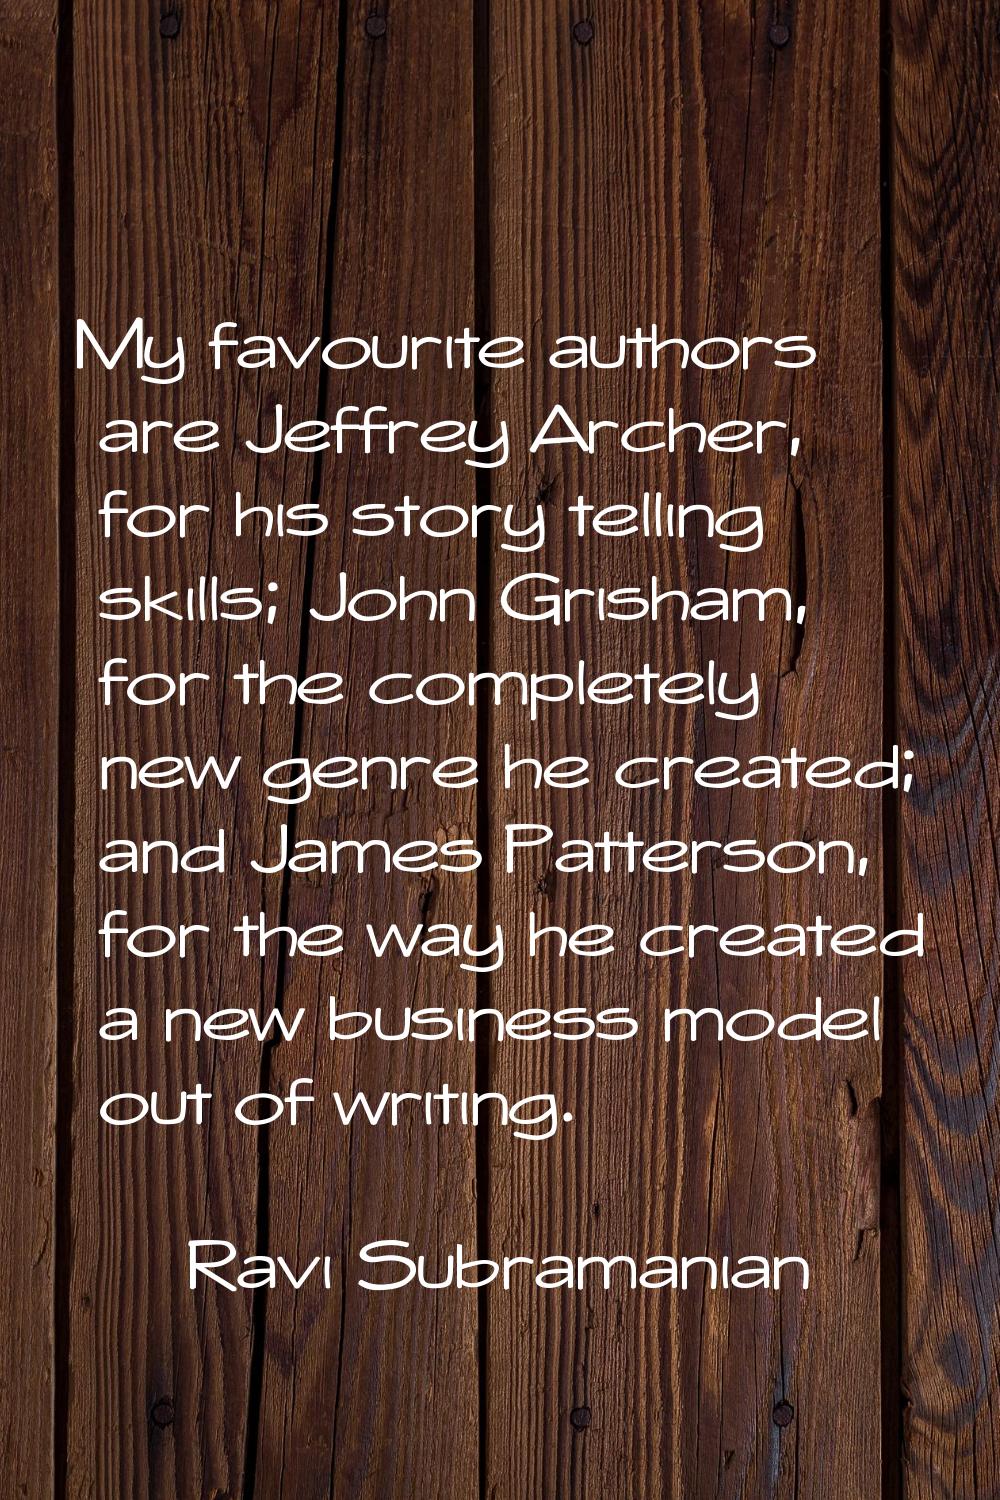 My favourite authors are Jeffrey Archer, for his story telling skills; John Grisham, for the comple